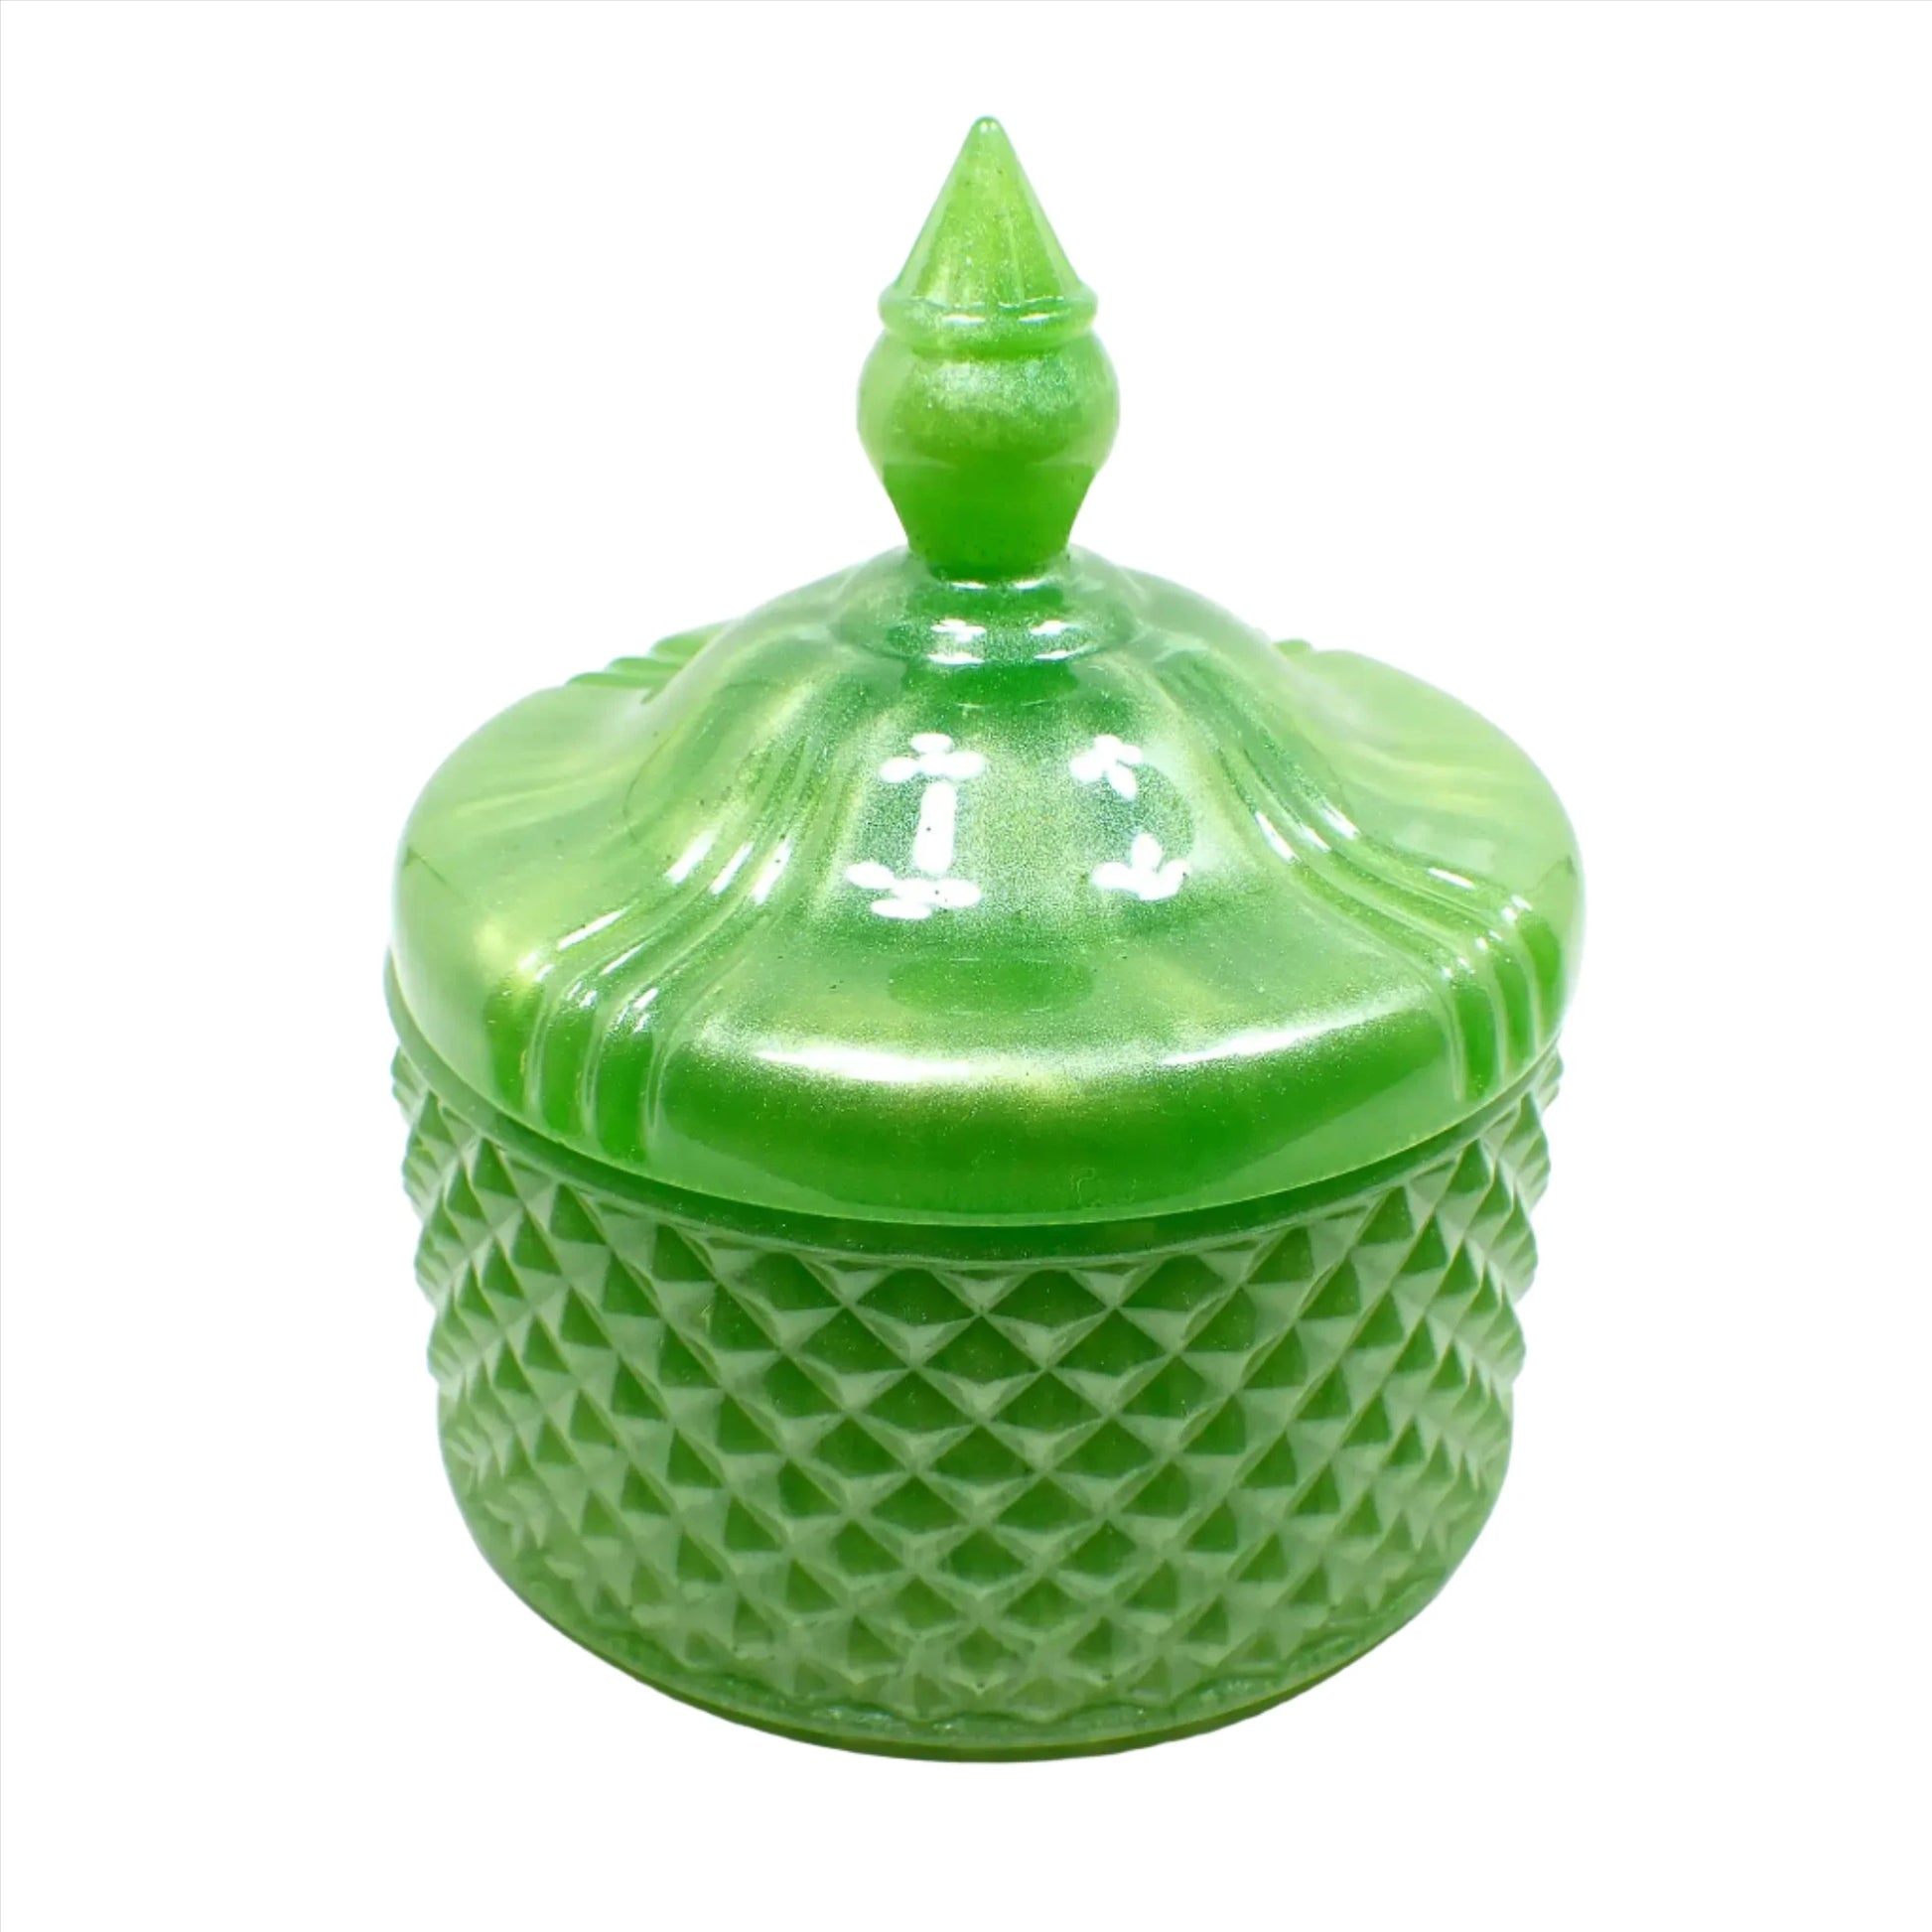 Side view of the pearly lime green trinket candy dish. The bottom part has a textured bumpy diamond shaped design all the way around it. The piece itself has a rounded shape. The lid is smooth with some indented lines going down the curves as it tapers at the top. The very top of the lid has a tapered cone shape to grab onto so you can lift the lid off the trinket box.